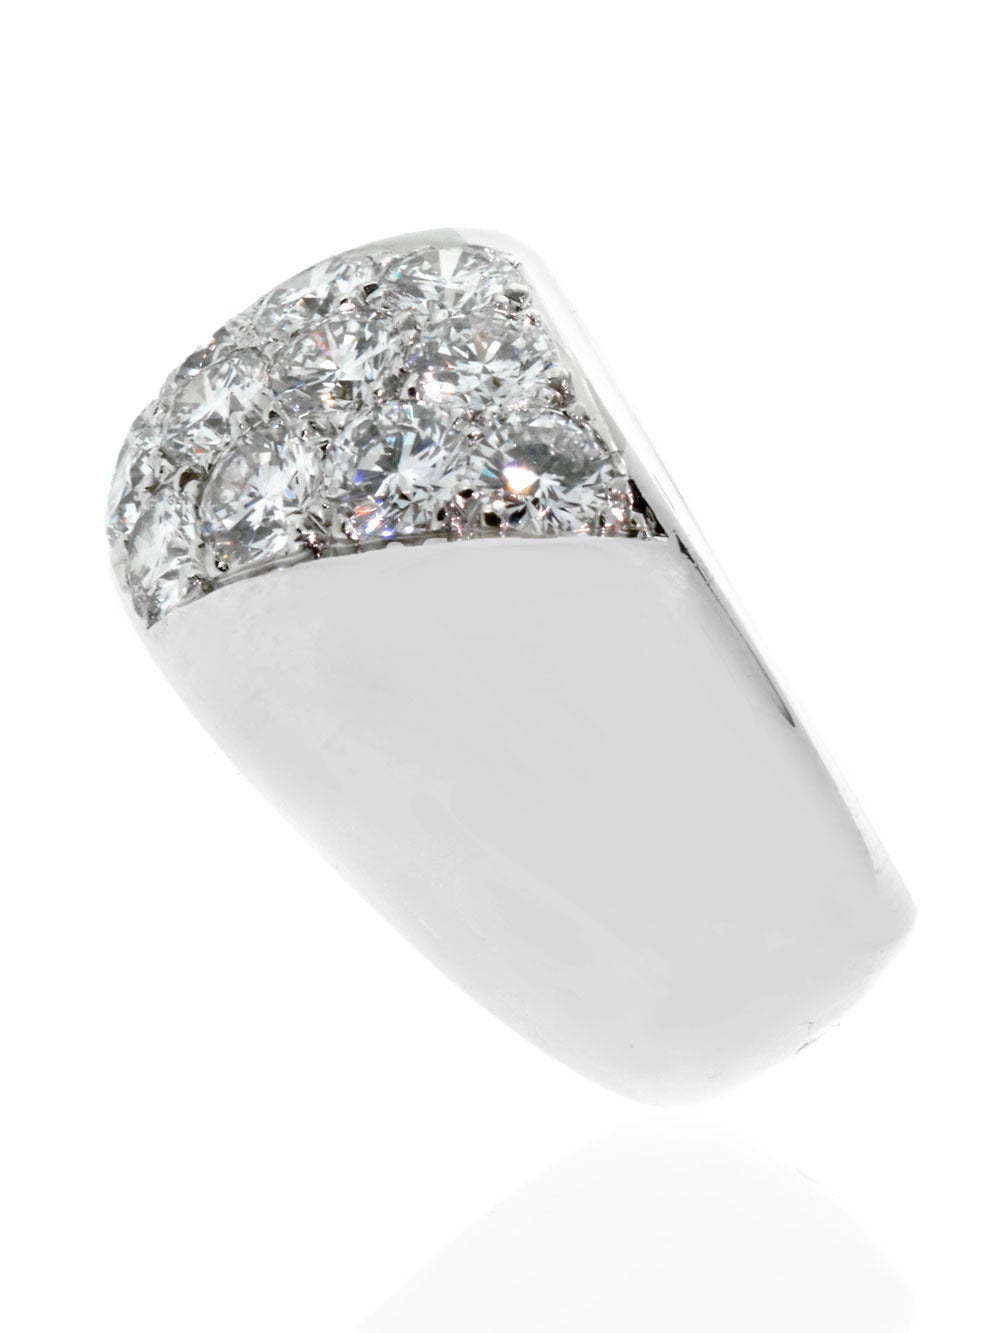 A marvelous authentic Cartier ring is presented here, immaculately set with approximately 2.40 carats of the finest of Cartier round brilliant cut diamonds in shimmering 18k white gold. This Cartier diamond gold ring would be a beautiful gift for